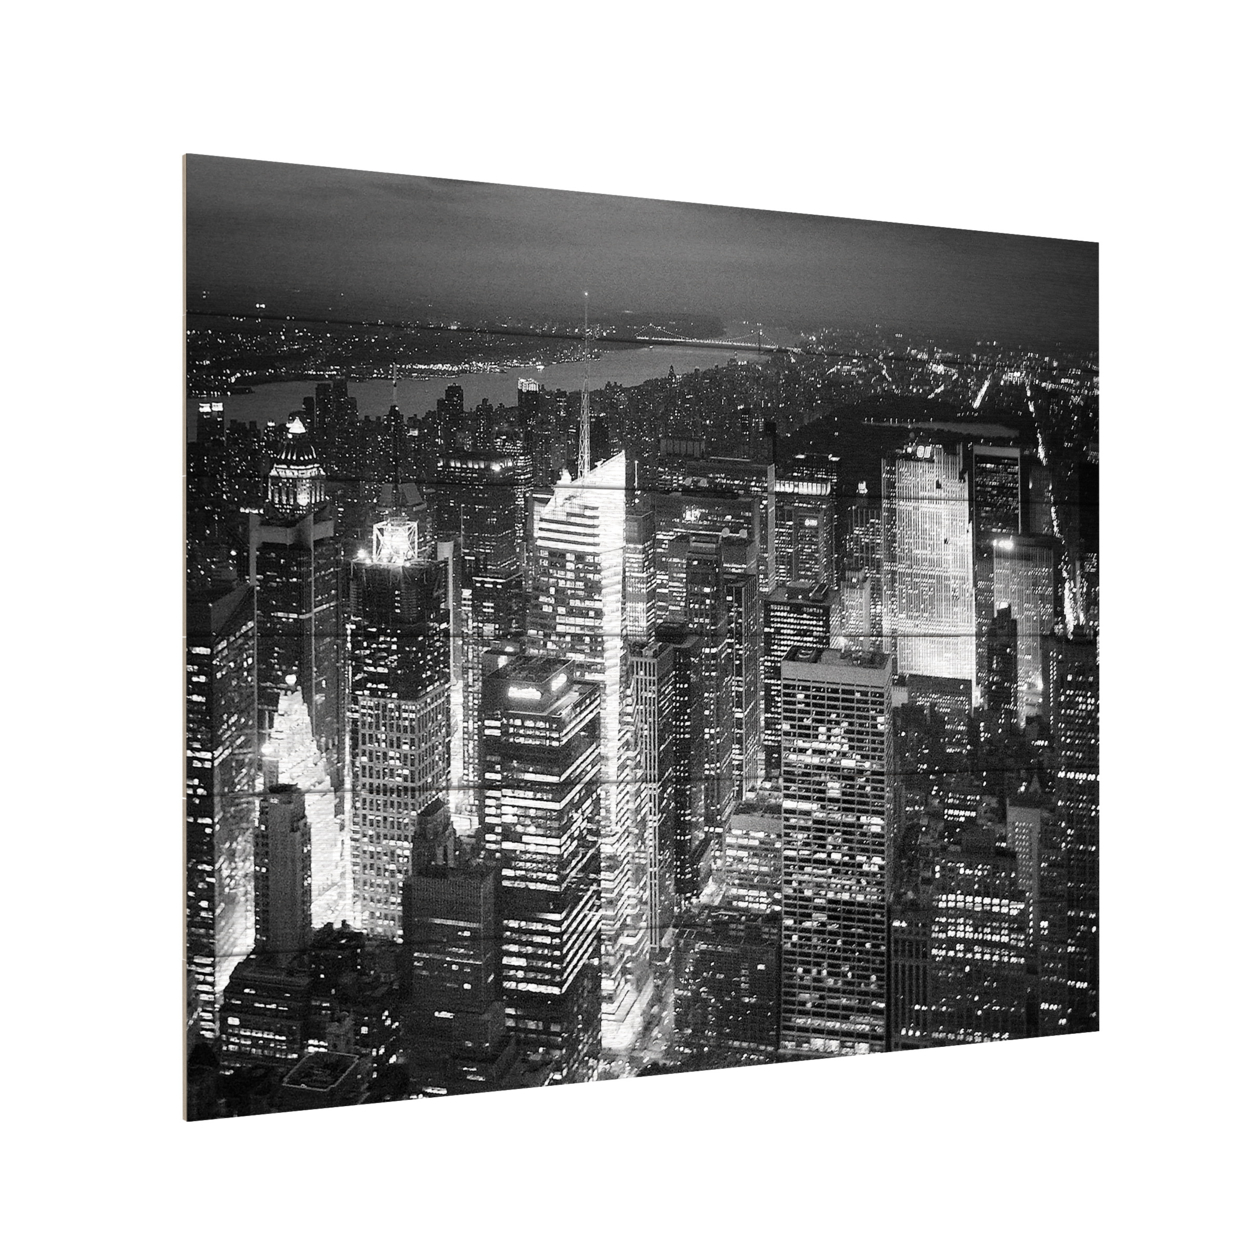 Wooden Slat Art 18 X 22 Inches Titled Times Square Ready To Hang Home Decor Picture